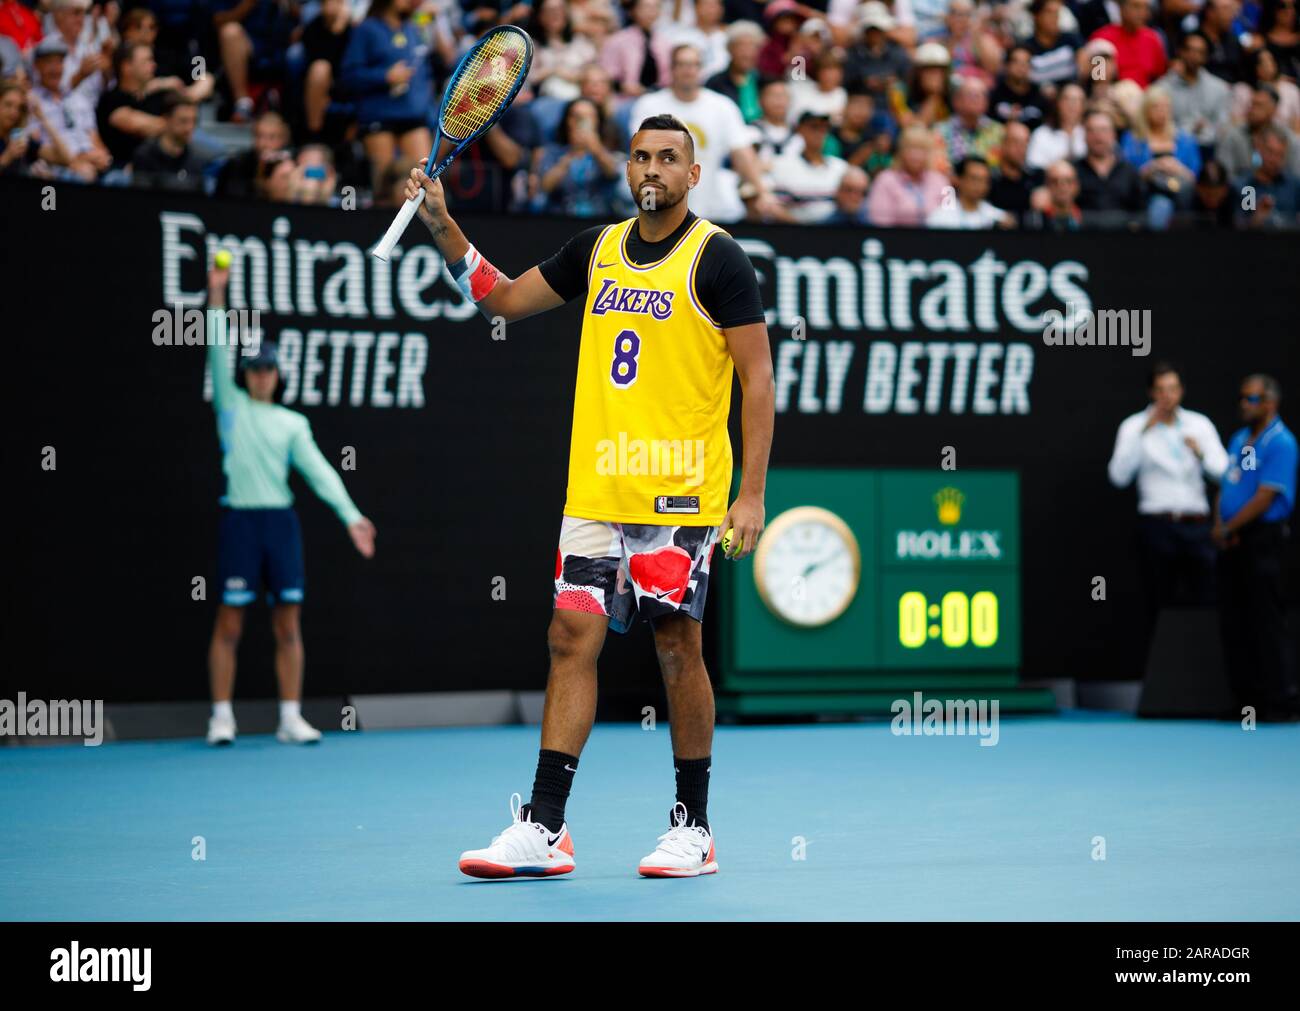 NICK KYRGIOS (AUS) wears a Lakers jersey to commemorate the passing of Kobe Bryant during a warm up session prior to his match against Rafael Nadal. Stock Photo